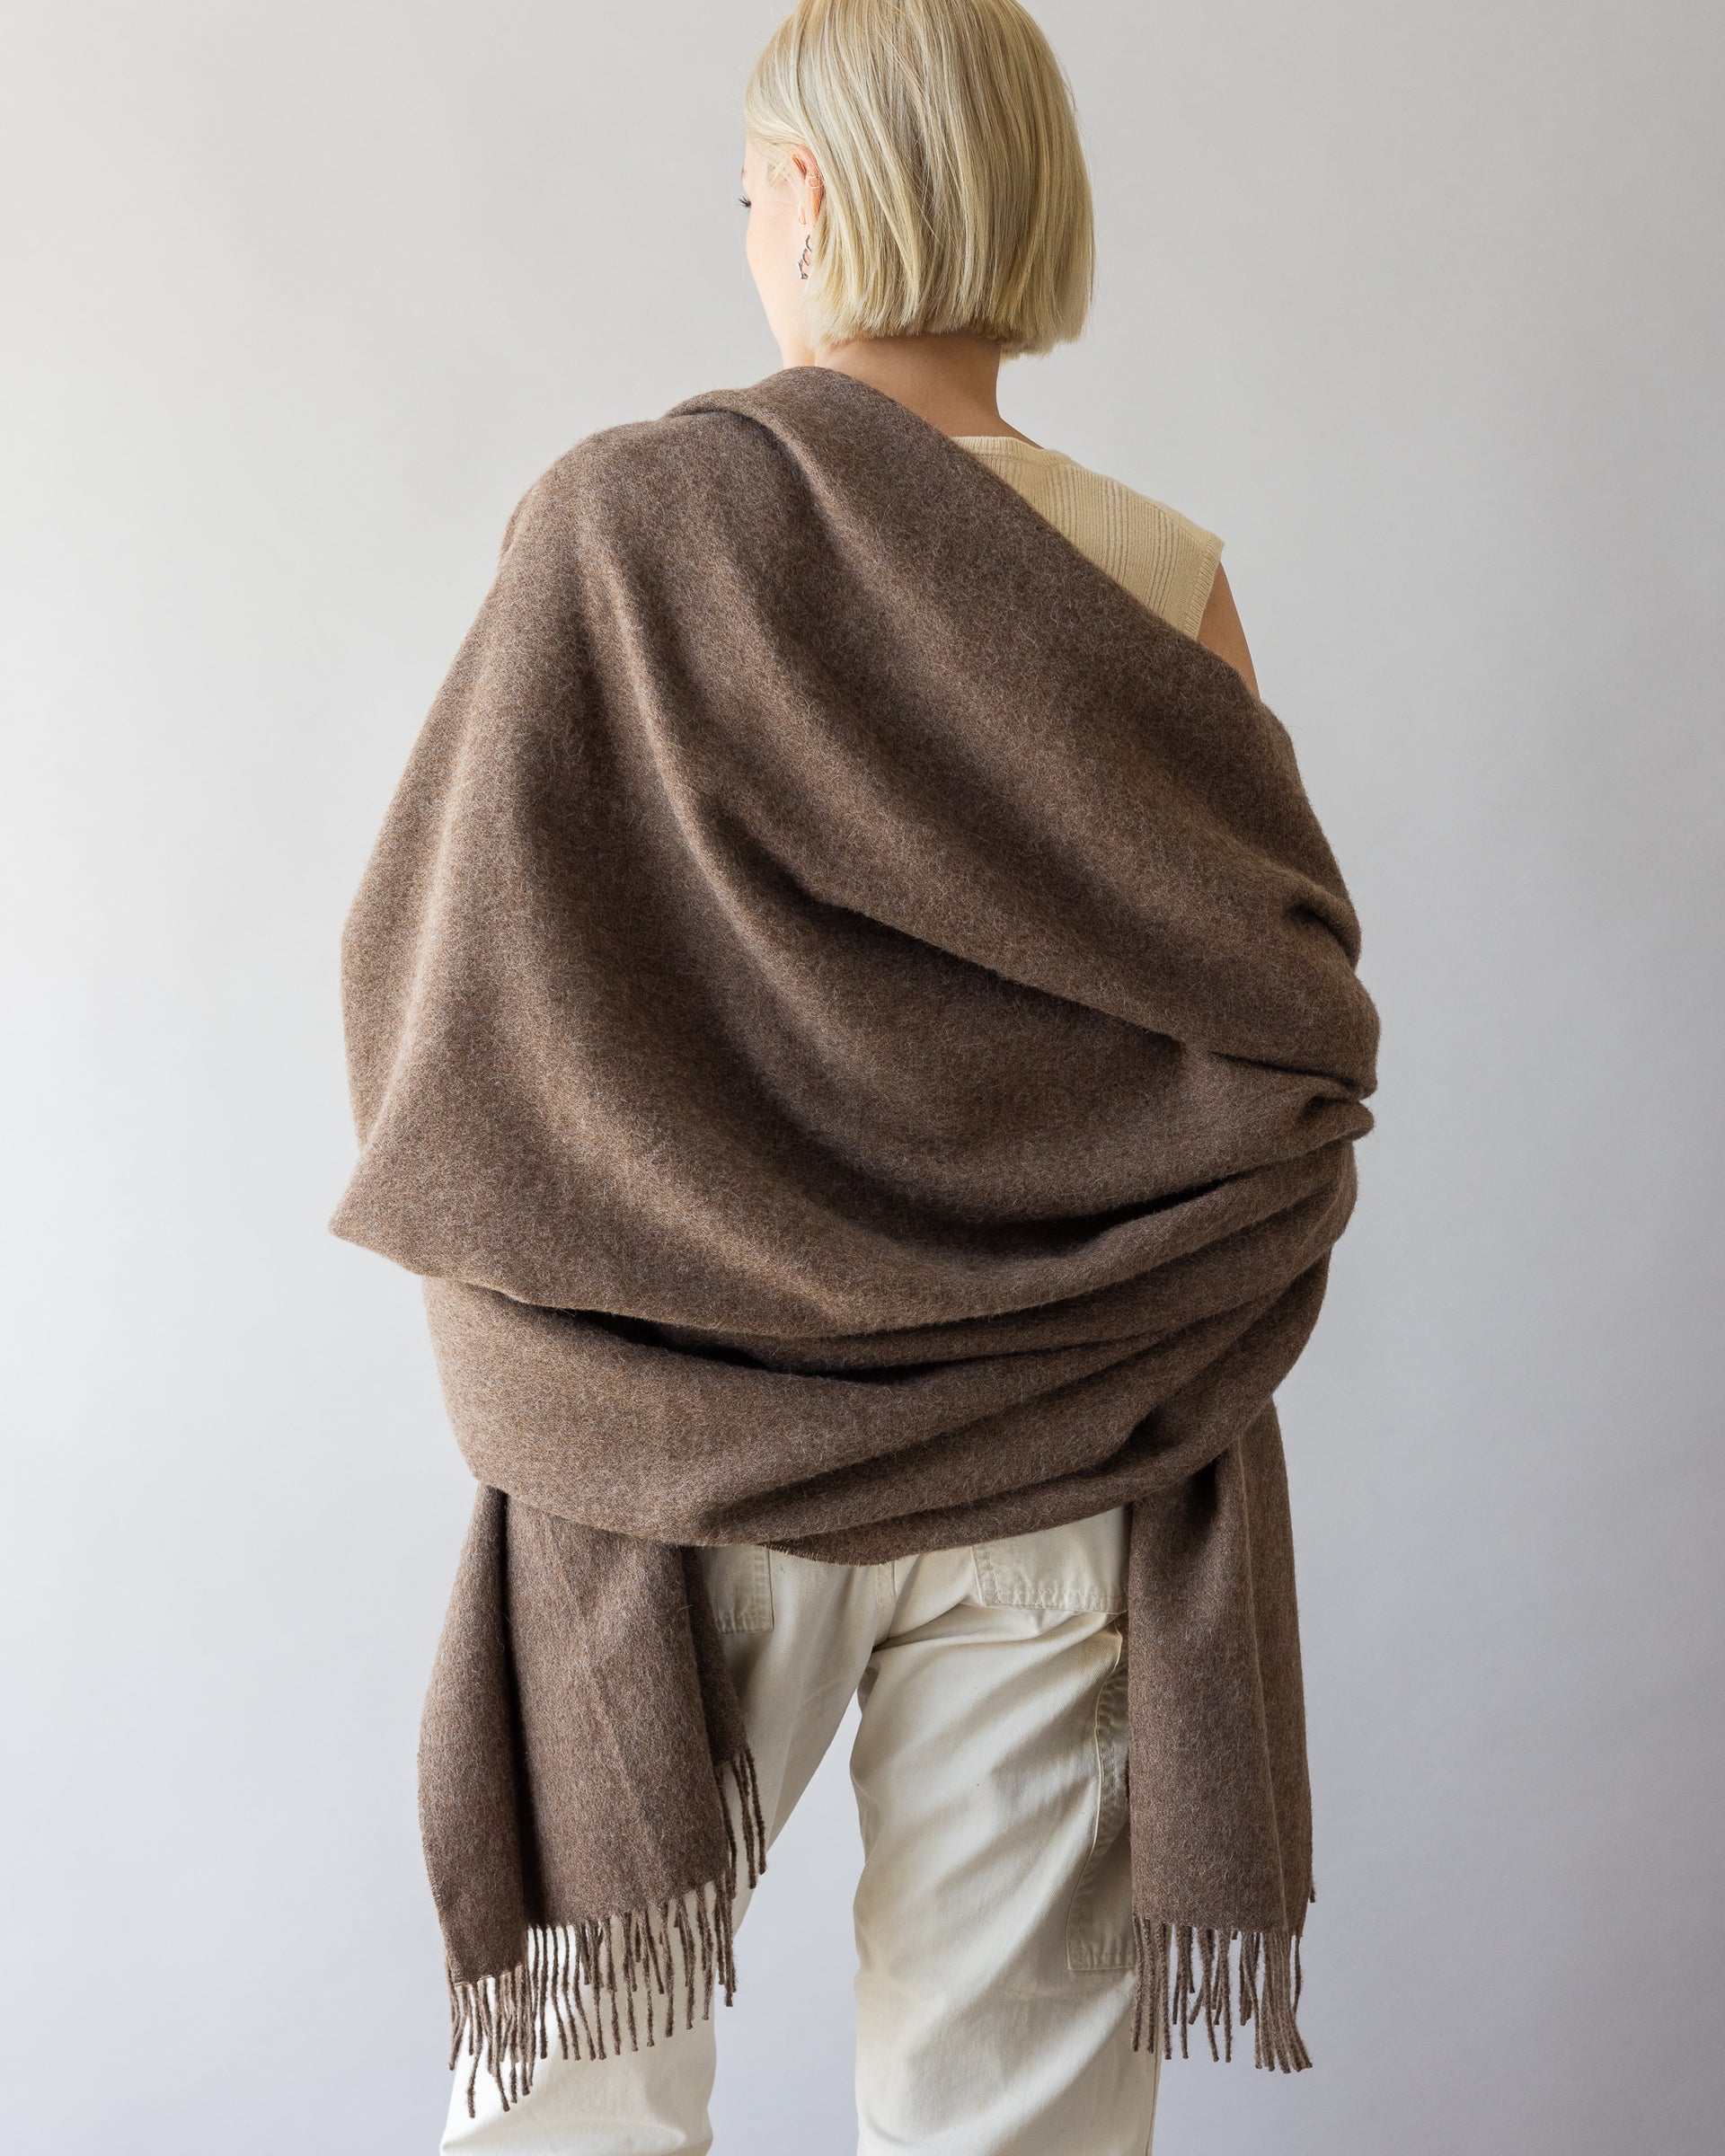 View of a womans back with brown alpaca throw over her shoulders